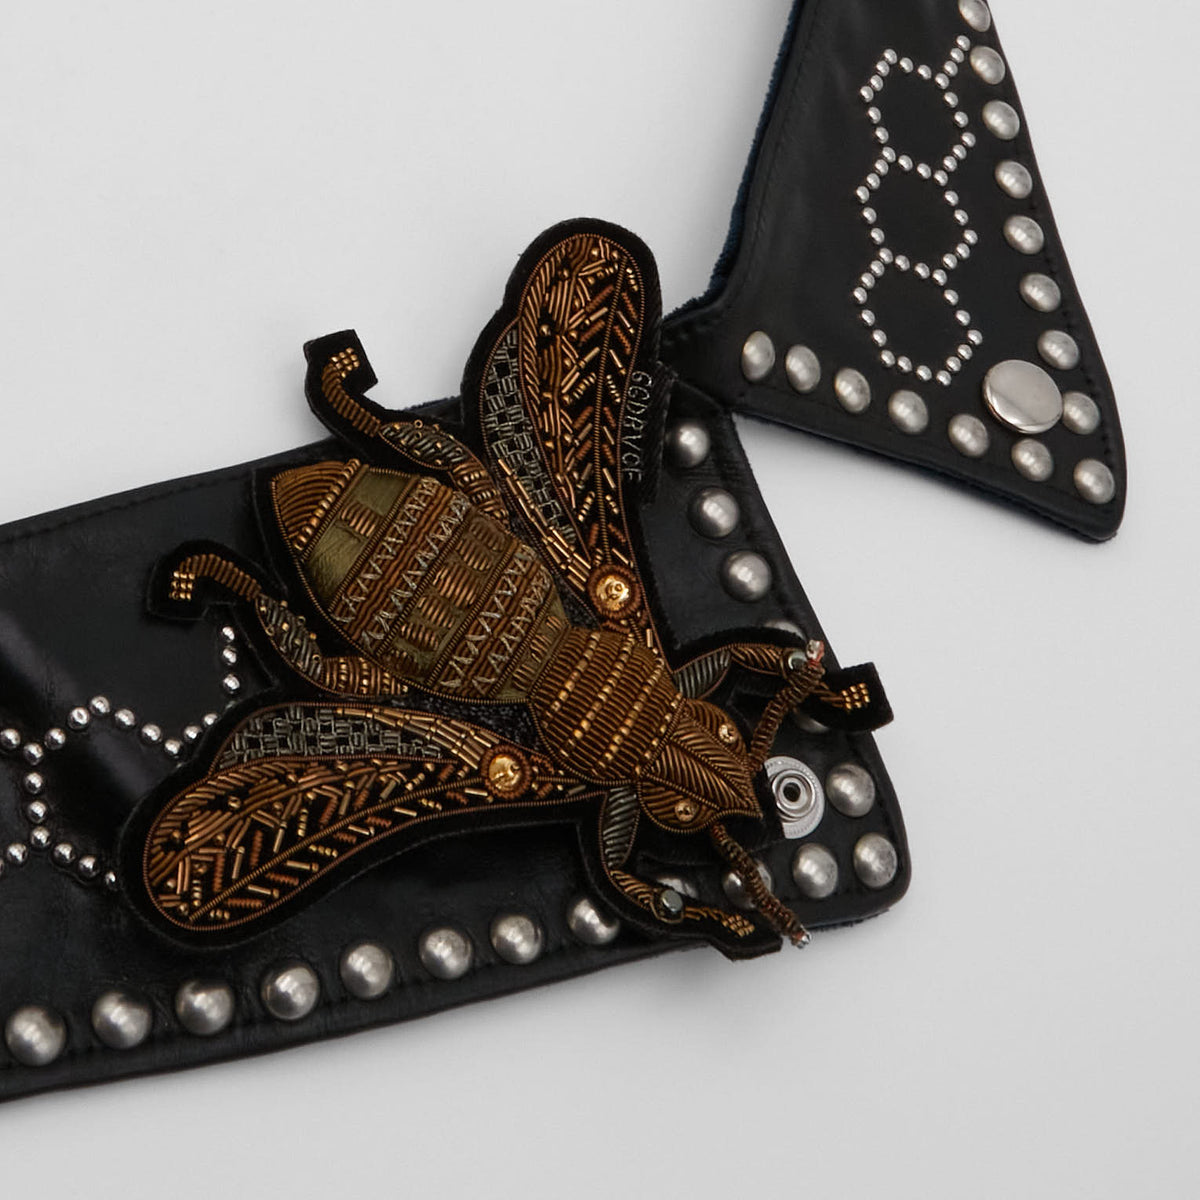 Golden Goose Leather Collar with Studs and brooch pin